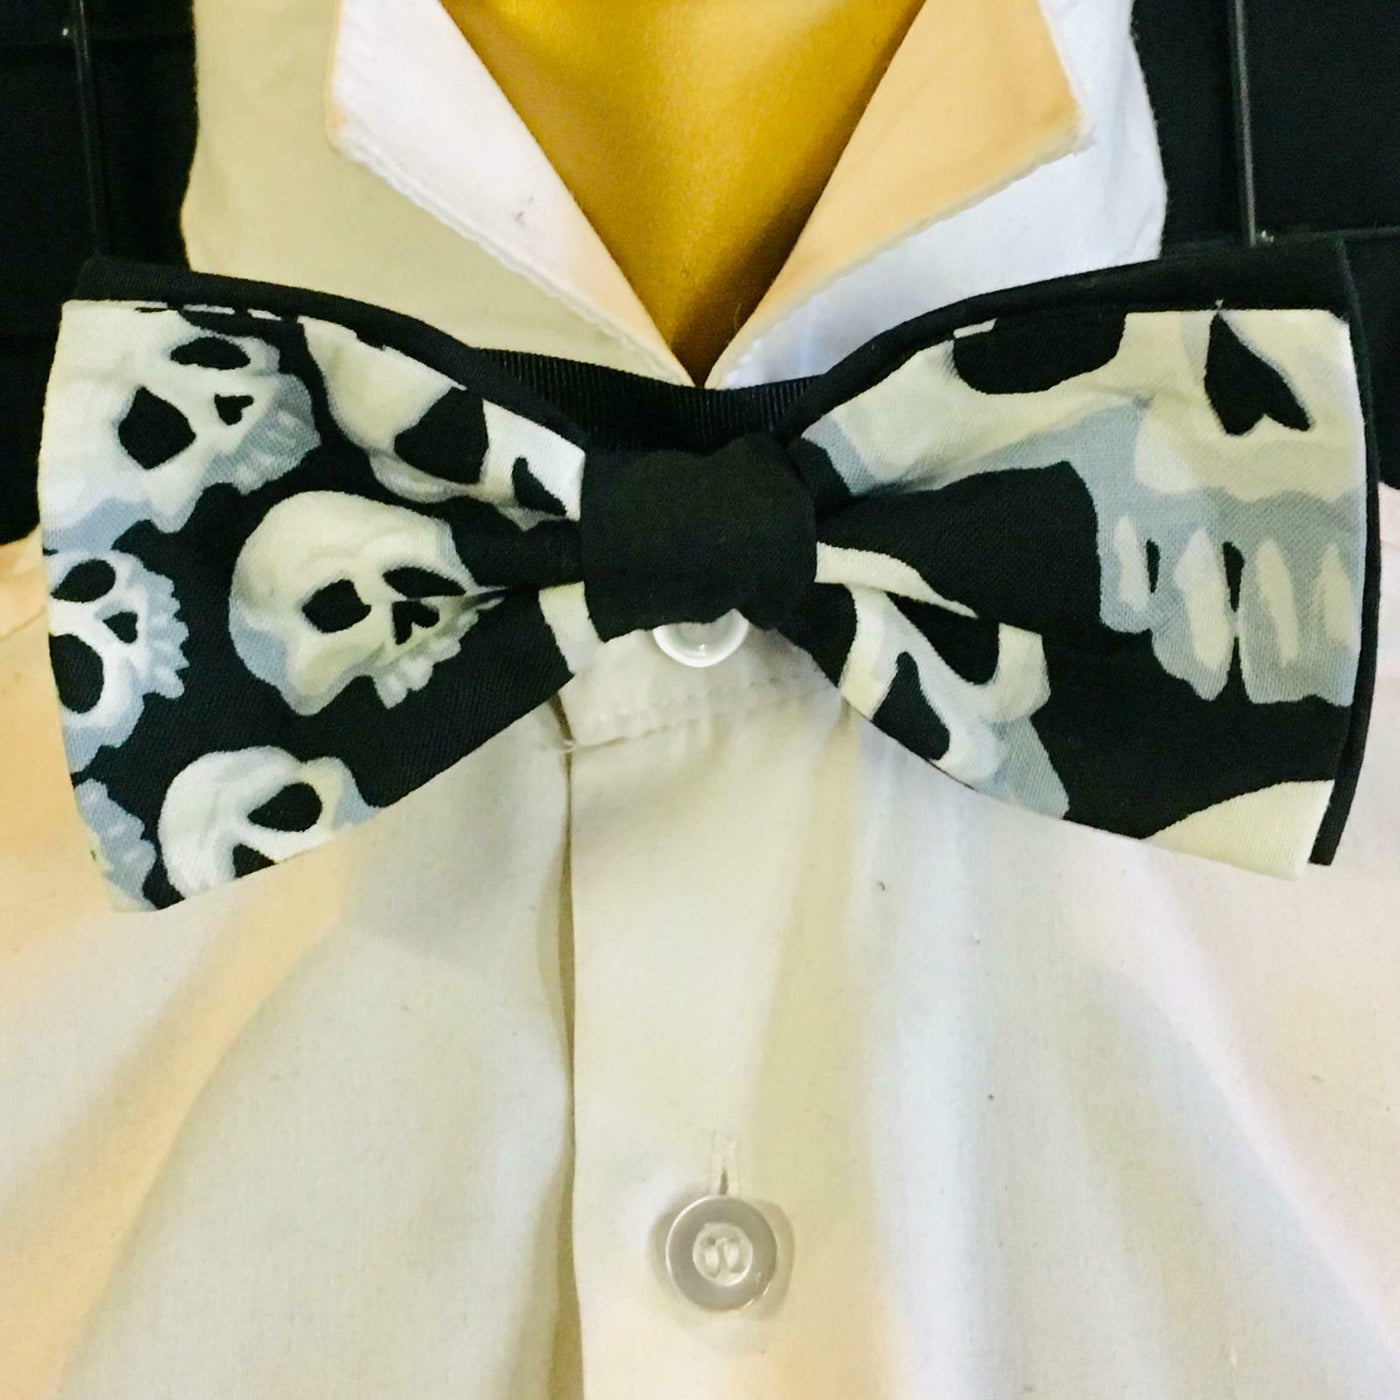 Infinity Spiral Skulls Bowtie Dickie Hair Bow Prom Pre-Tied Suit feeanddave